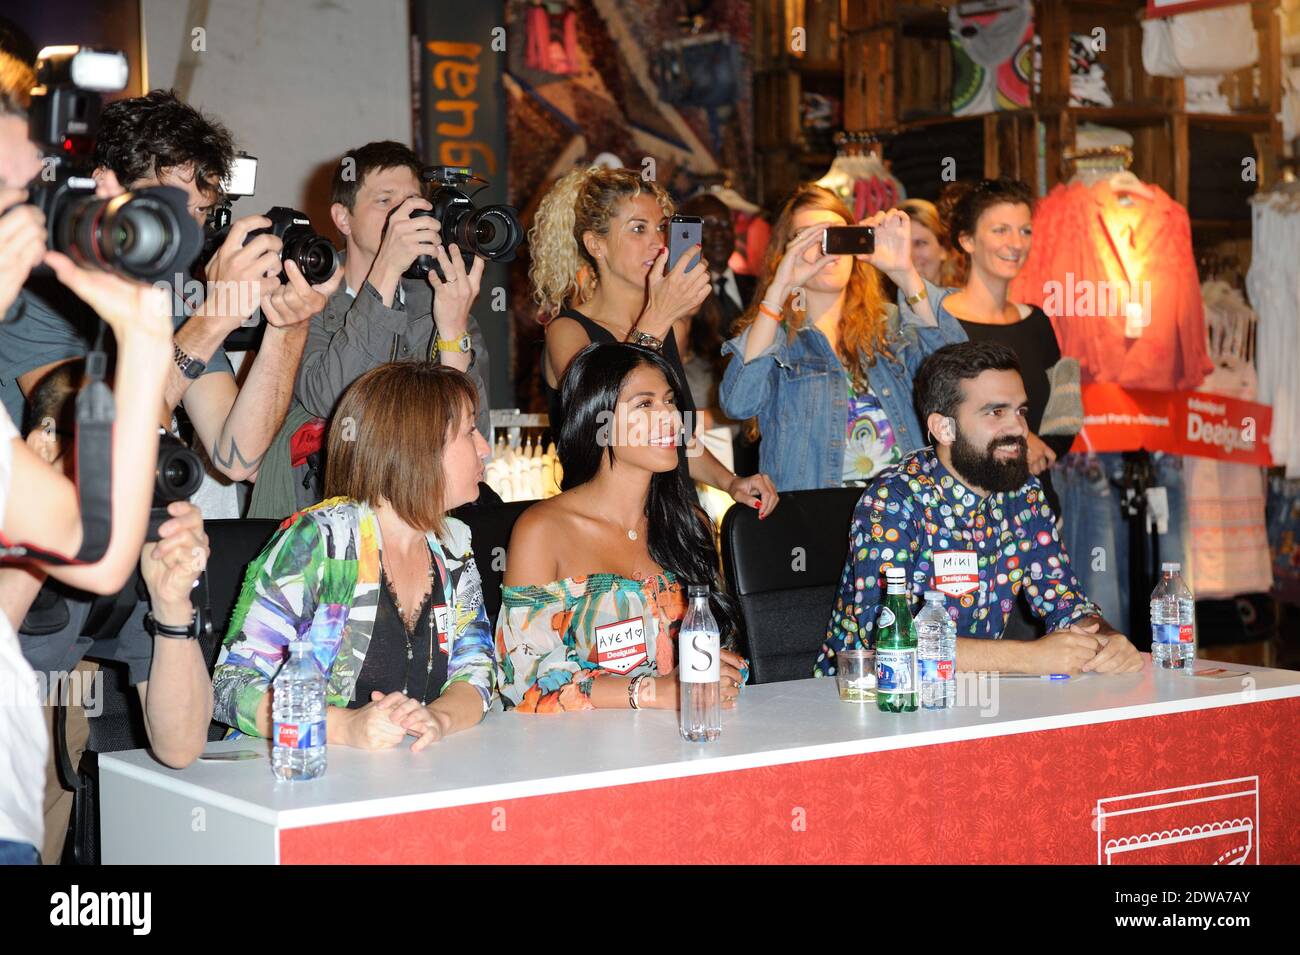 Ayem Nour attending Seminaked Contest held in Desigual shop in Paris, France  on June 25, 2014. Photo by Alban Wyters/ABACAPRESS.COM Stock Photo - Alamy